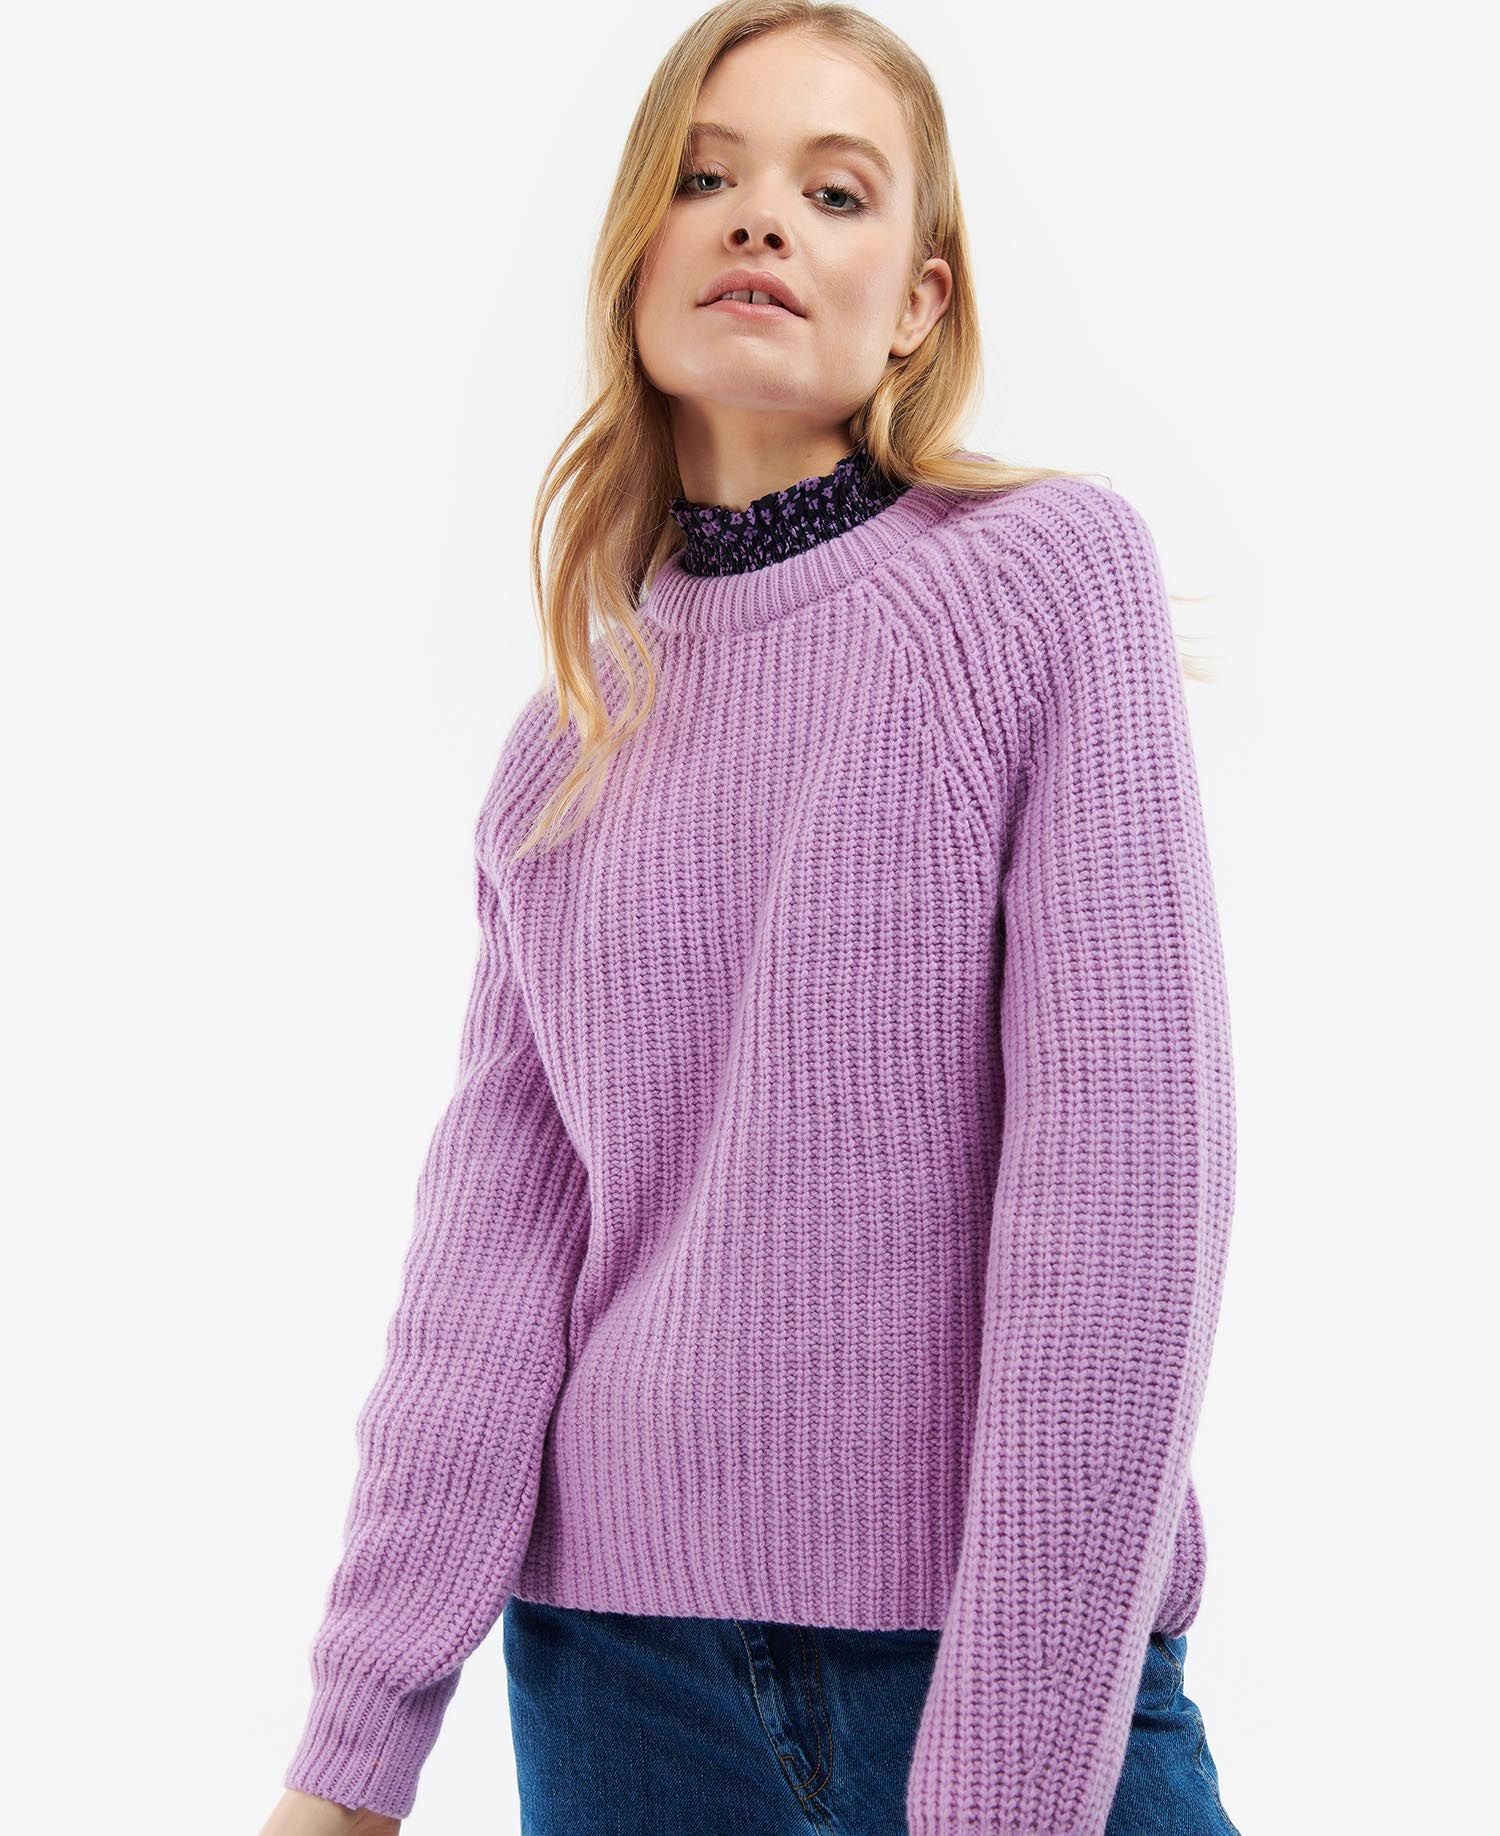 Barbour - Women's Hartley Knit Jumper - Lilac Blossom